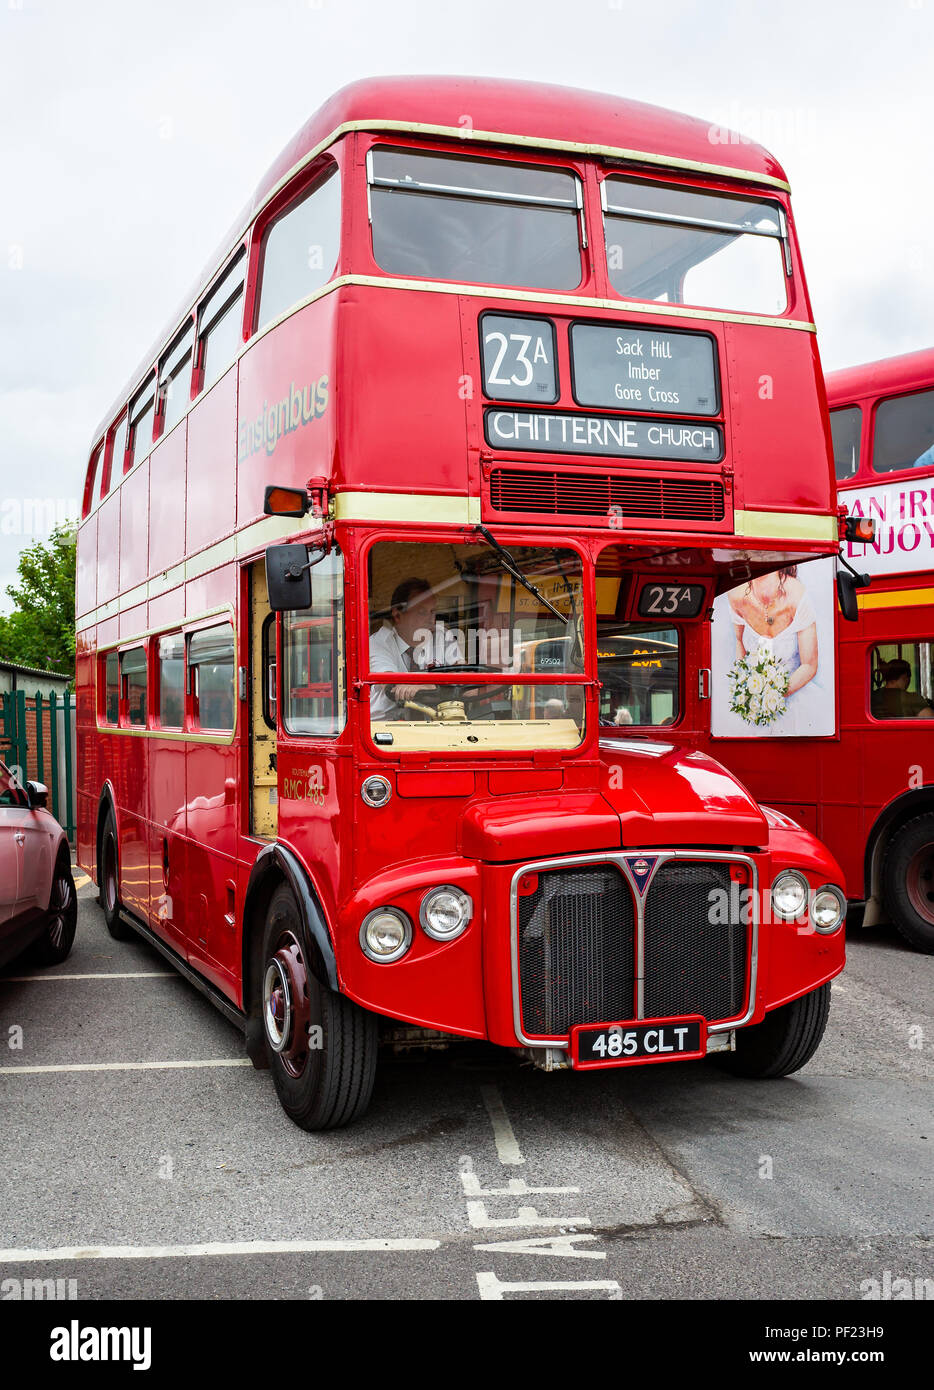 Red Routemaster London double decker bus, day classic bus service between Warminster Imber Village taken in Wiltshire, UK on Photo - Alamy